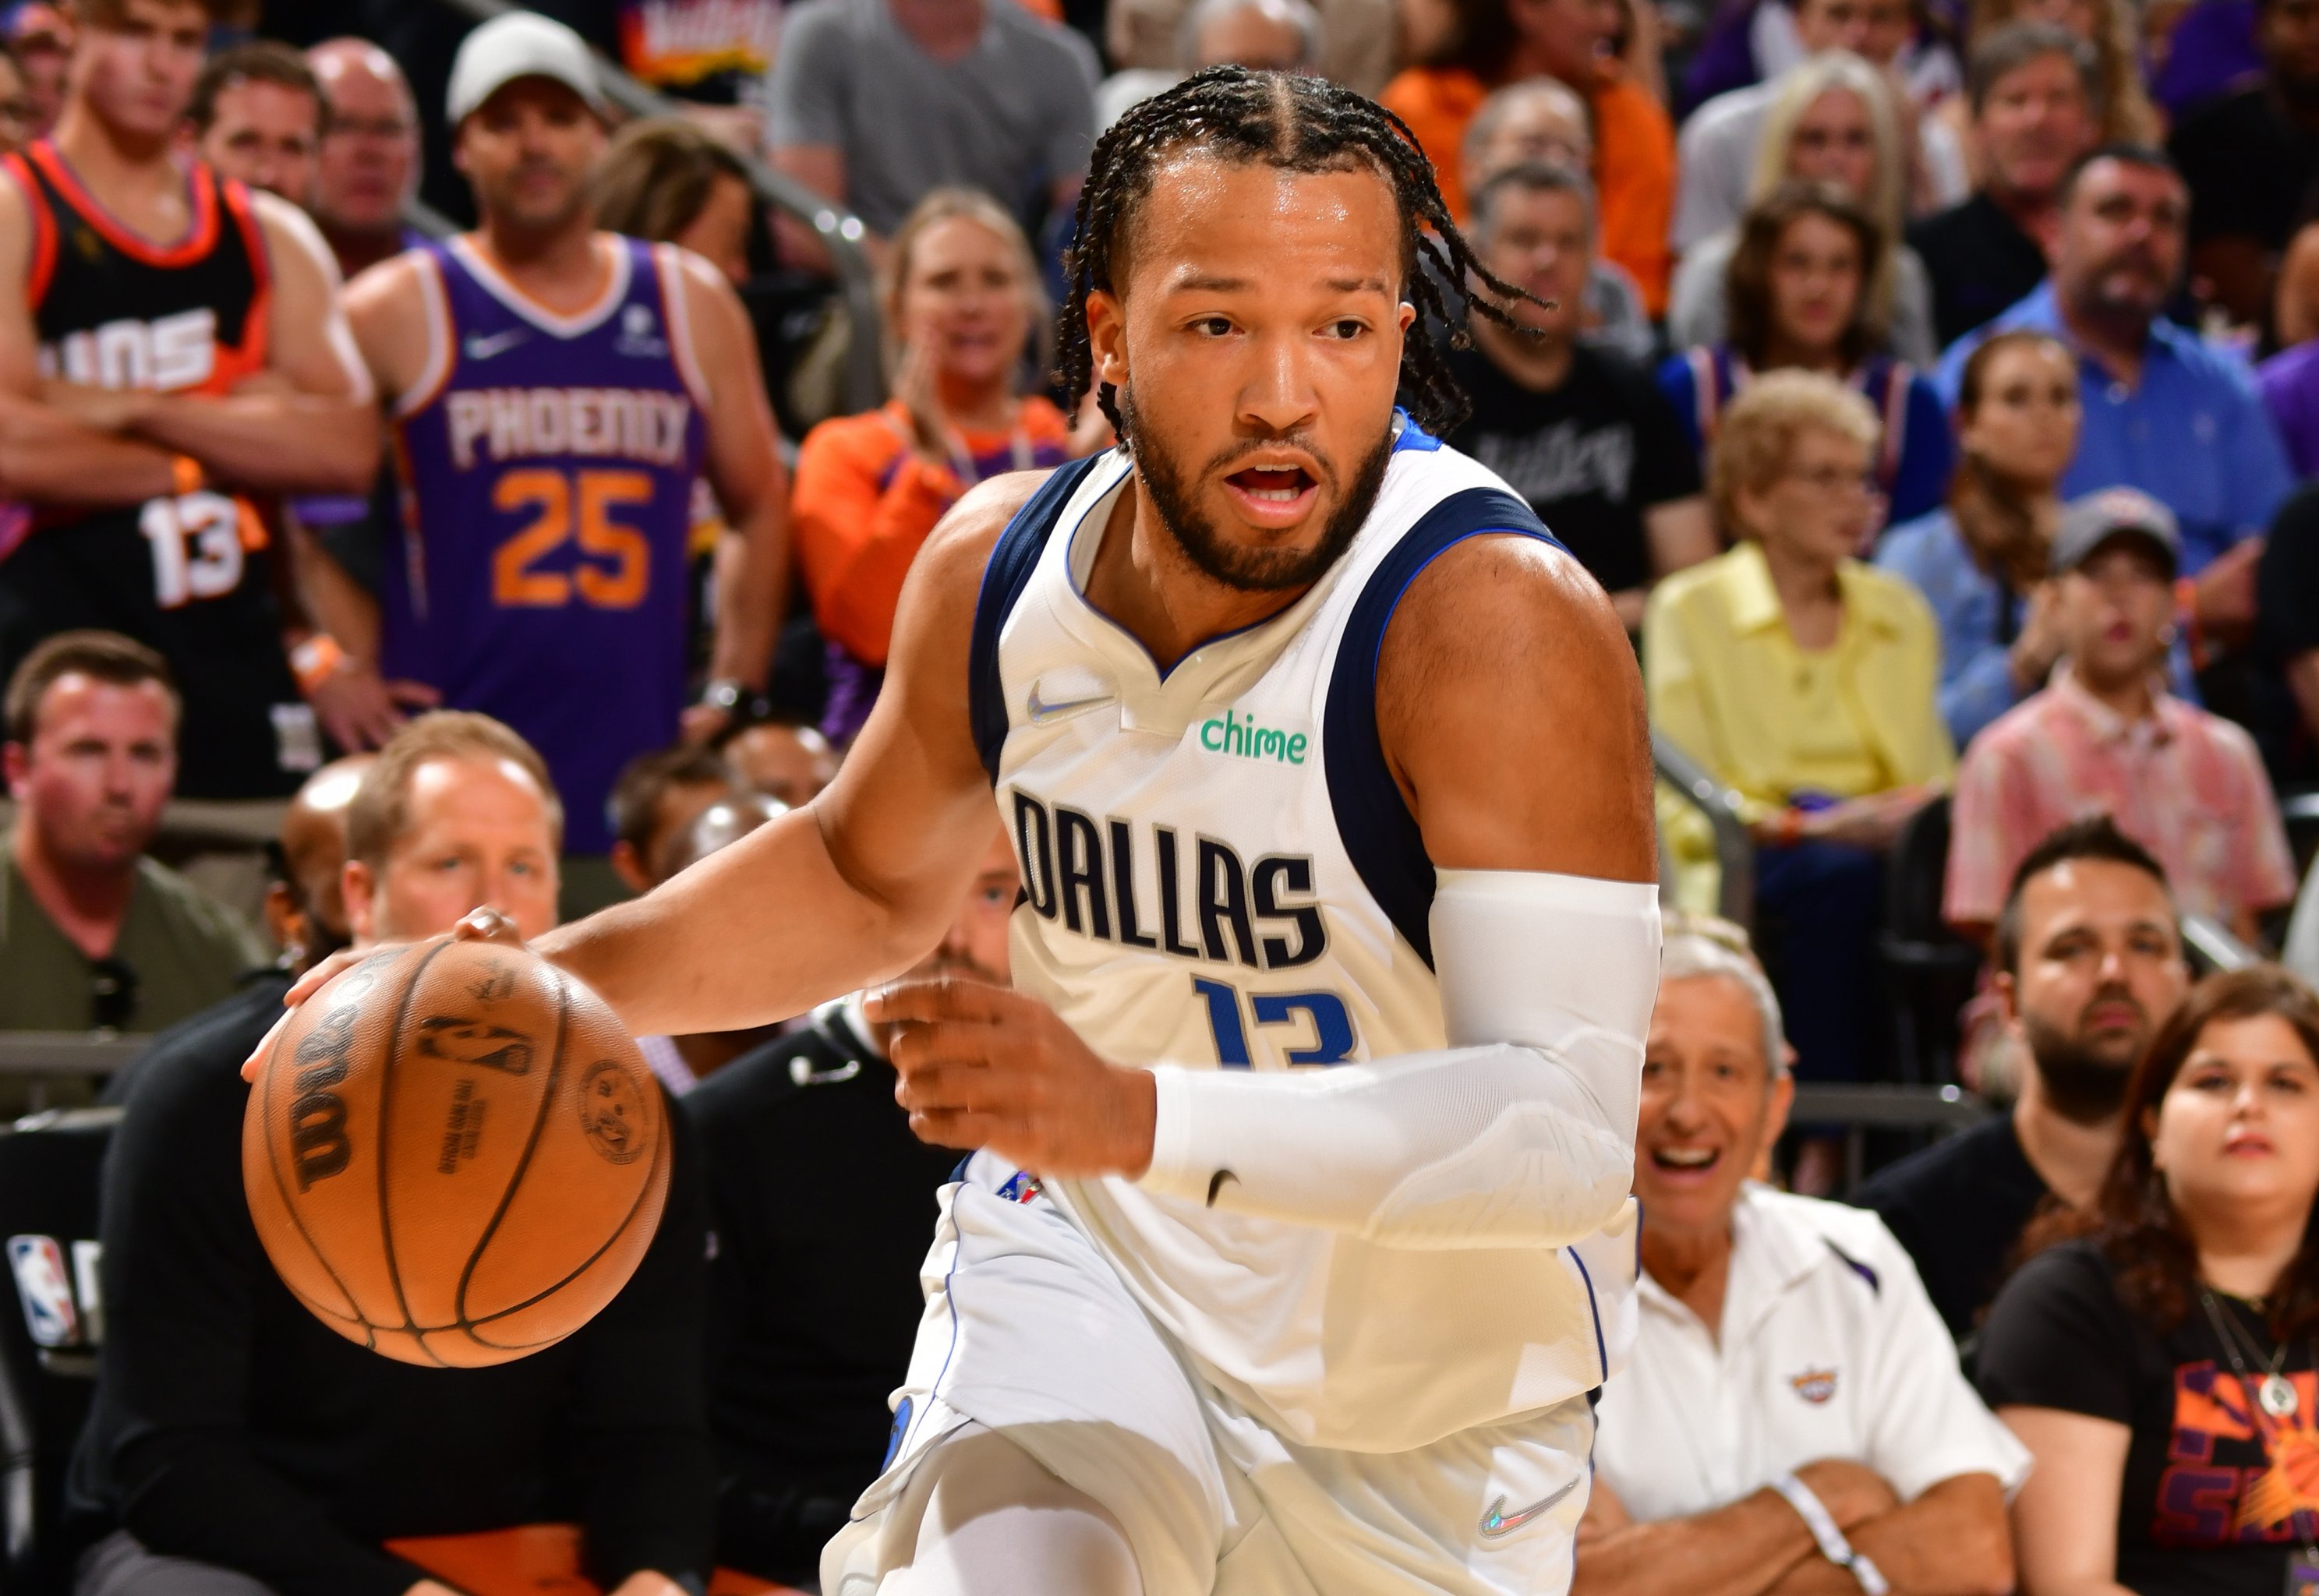 Jalen Brunson is the answer to the Knicks' past point guard problems